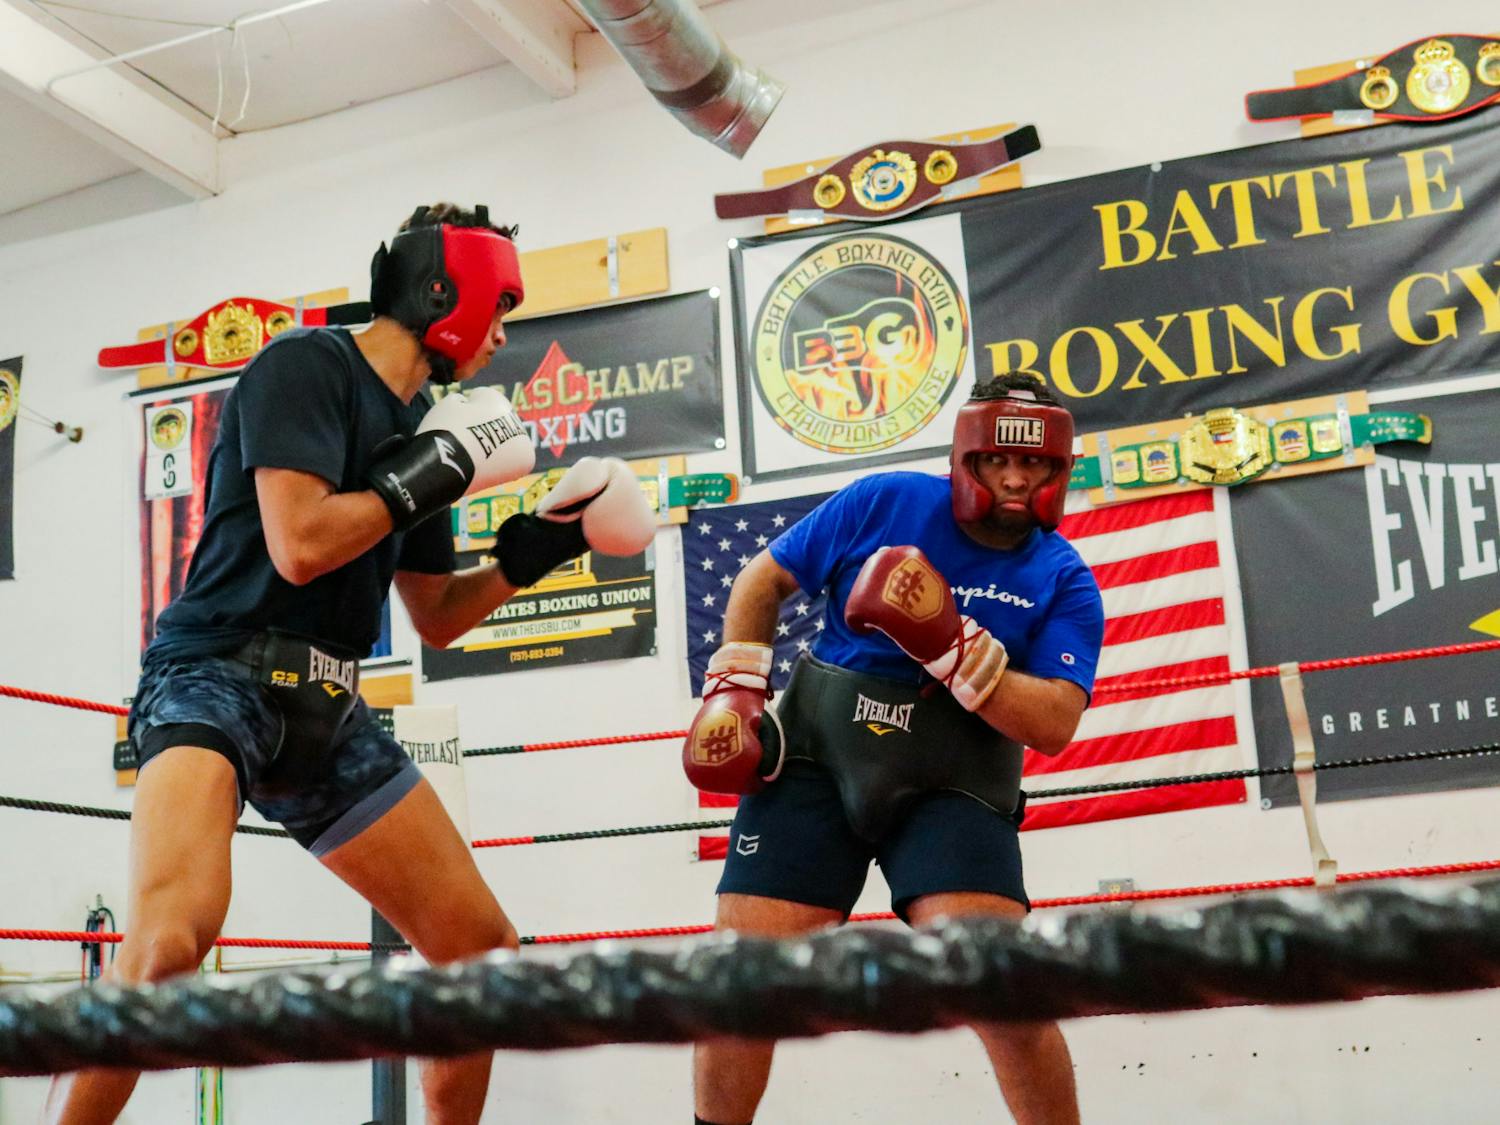 Carolina Boxing Club veteran David Trav (right) spars in the ring during a practice on Sept. 12, 2022, at the Battle Boxing Gym in Columbia, S.C.